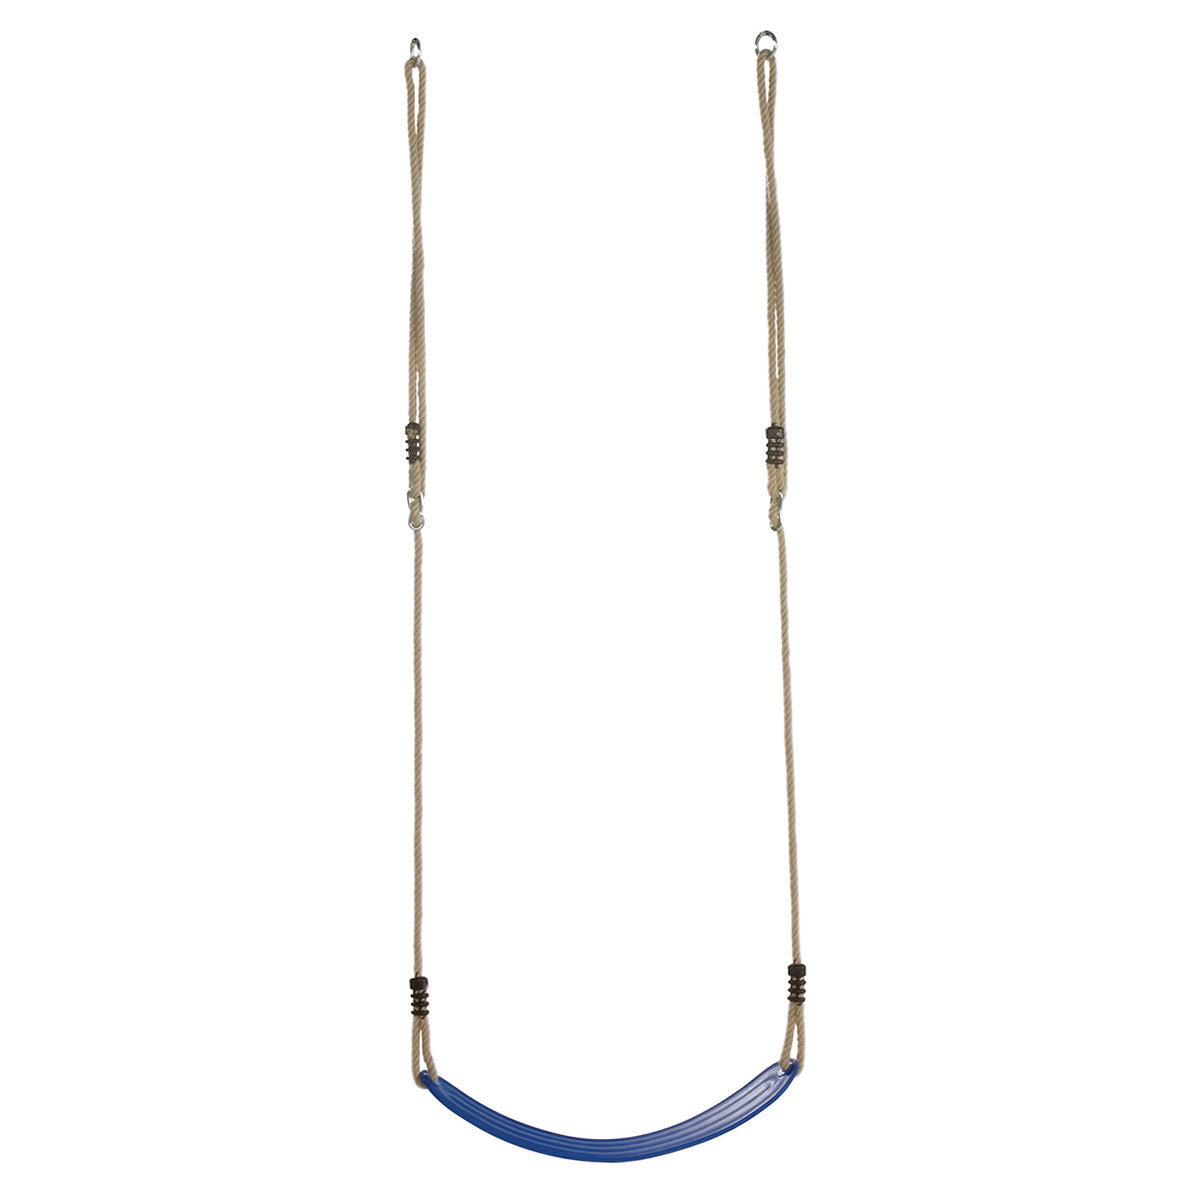 Strap Seat Moulded Ribbed BLUE With Adjustable Ropes